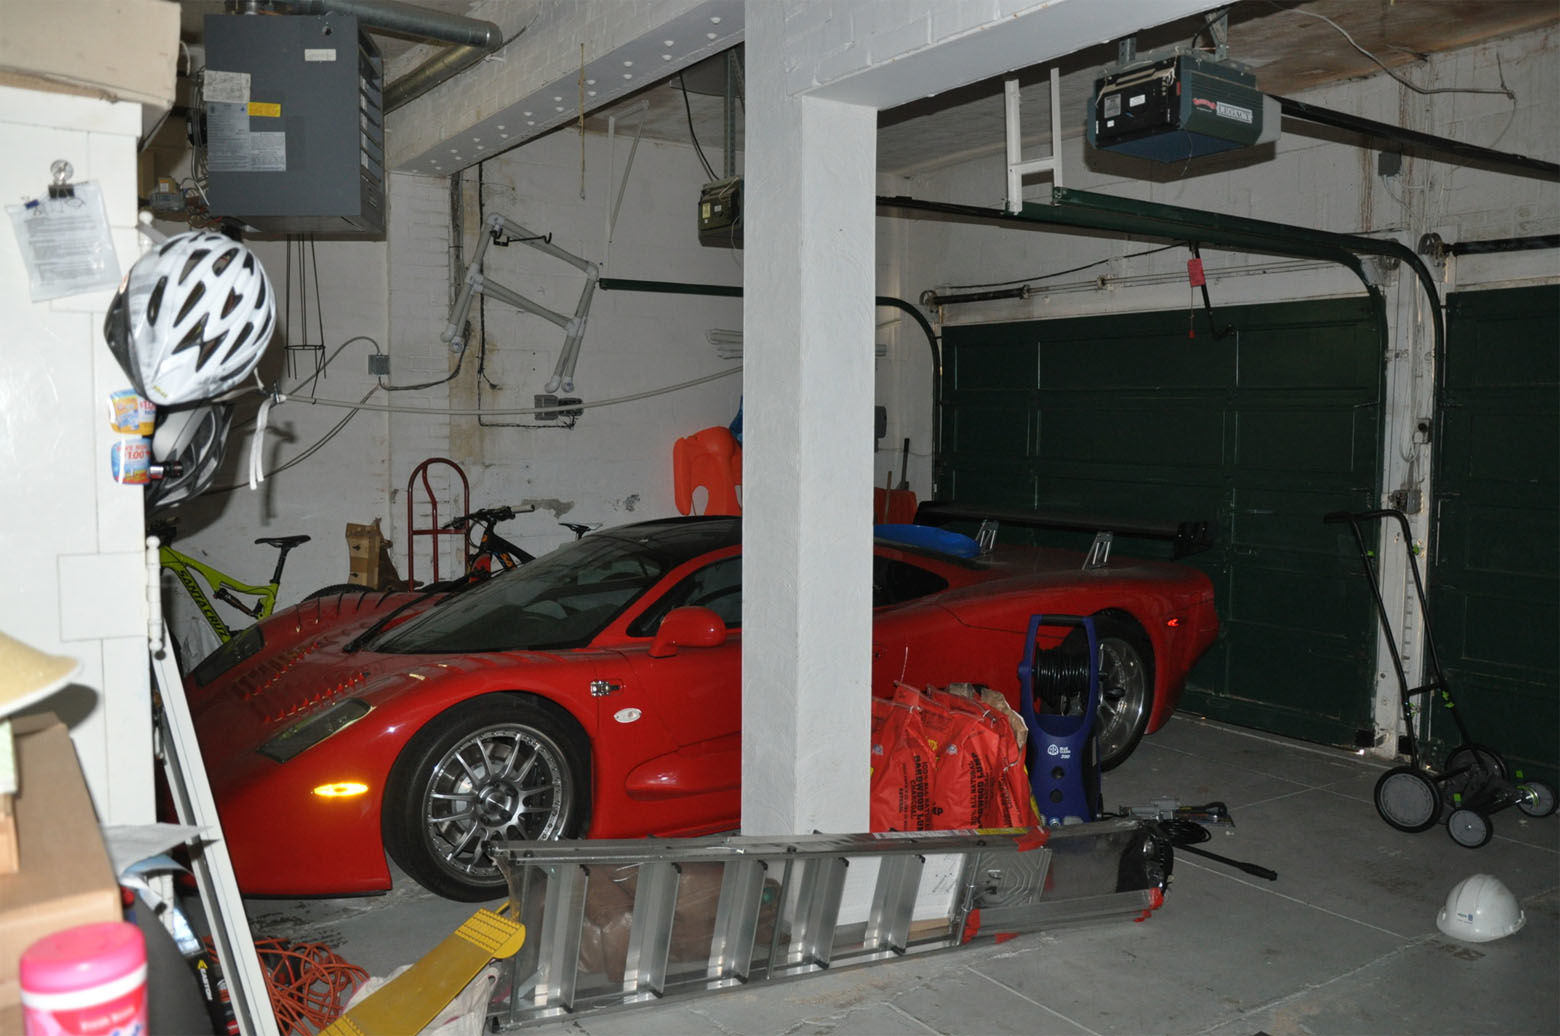 The Savopoulos family's red Mosler sports car. Savvas Savopoulos instructed his assisant to leave the $40,000 ransom inside the car. (Courtesy U.S. Attorney's Office for D.C.)